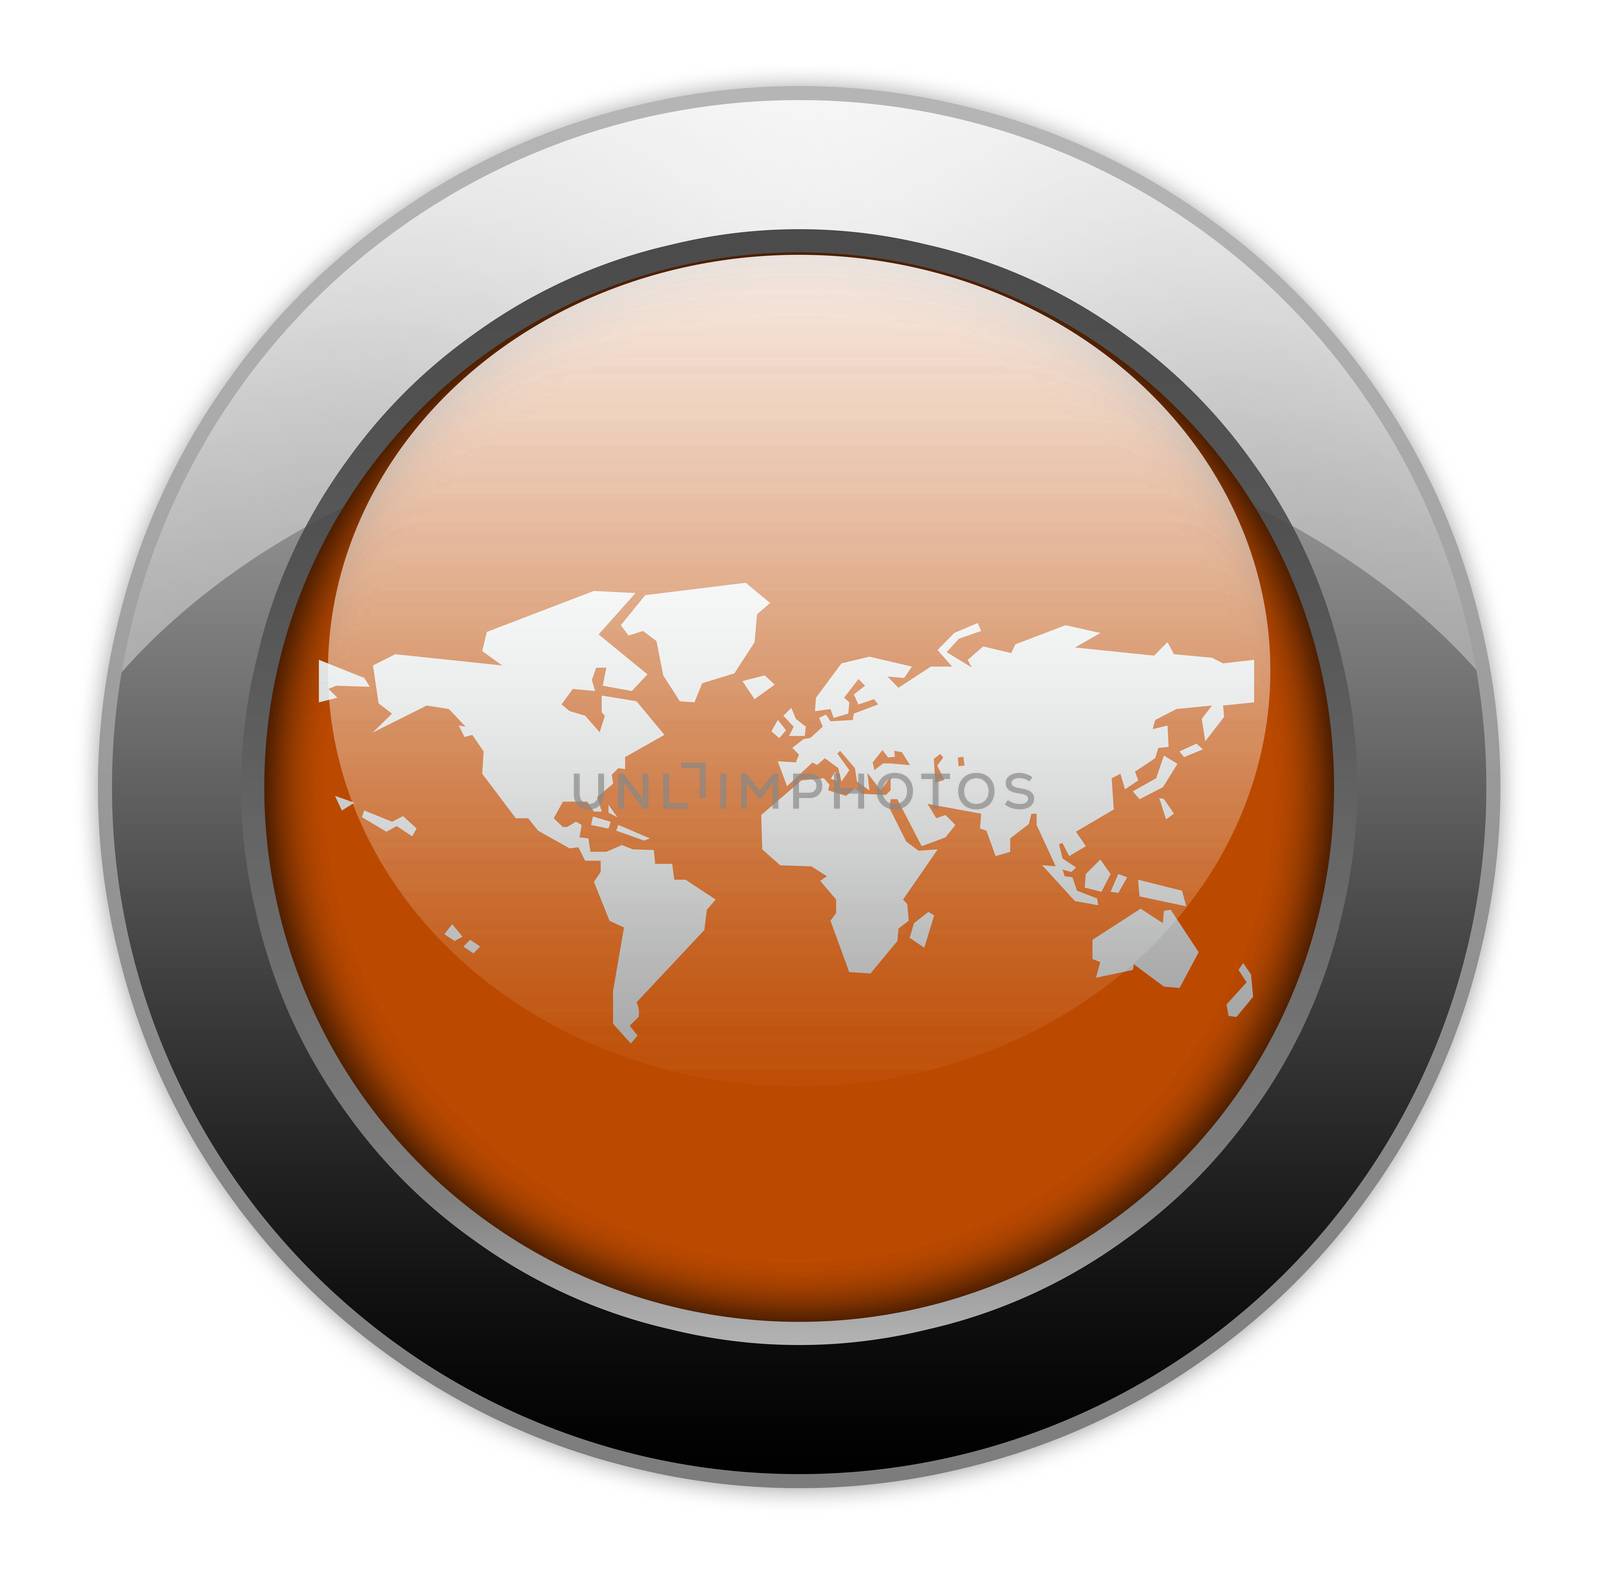 Icon, Button, Pictogram World Map by mindscanner